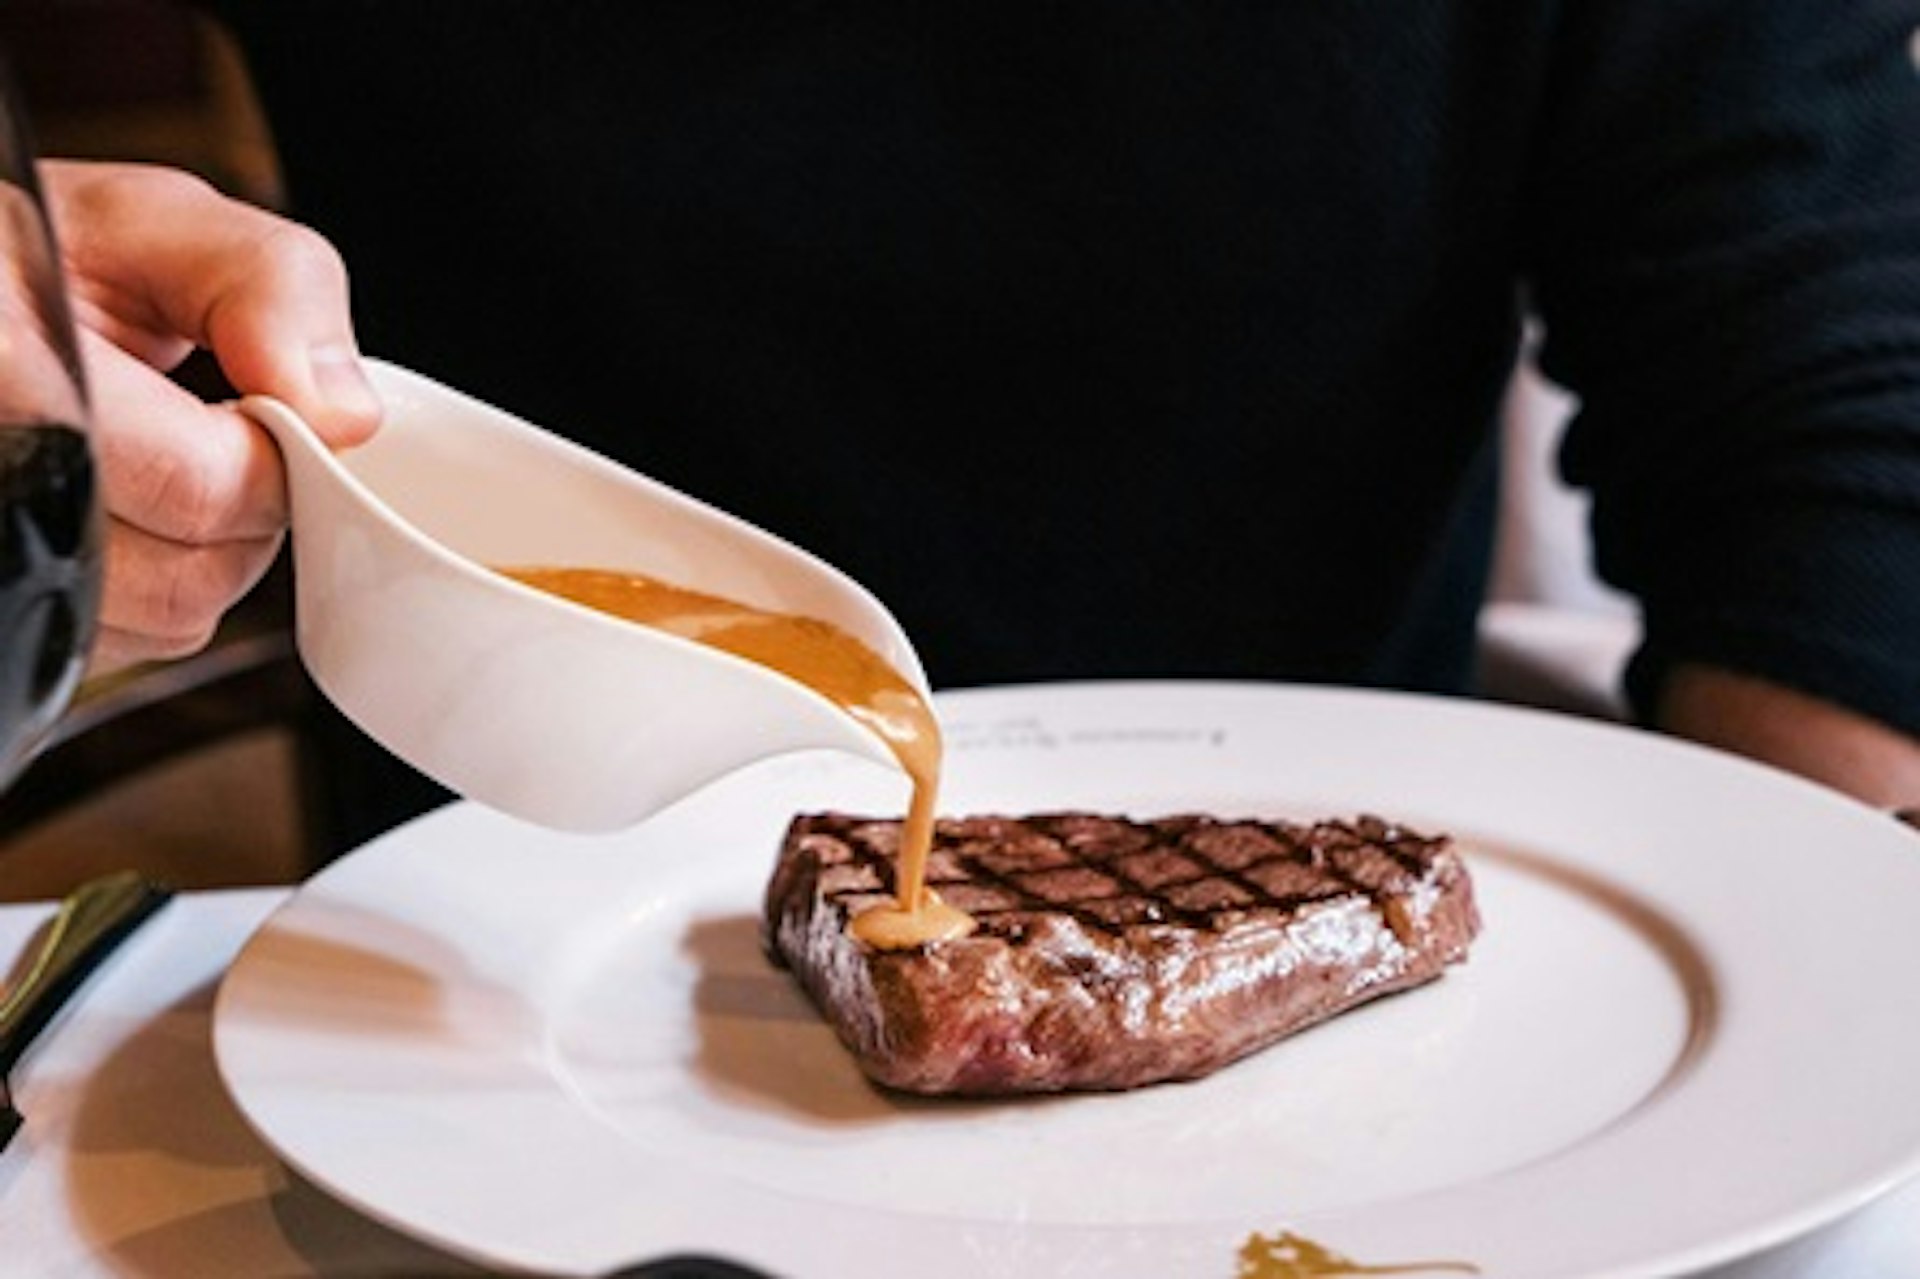 Three Course Dining Experience with Sides and Cocktail for Two at Marco Pierre White's London Steakhouse Co 1